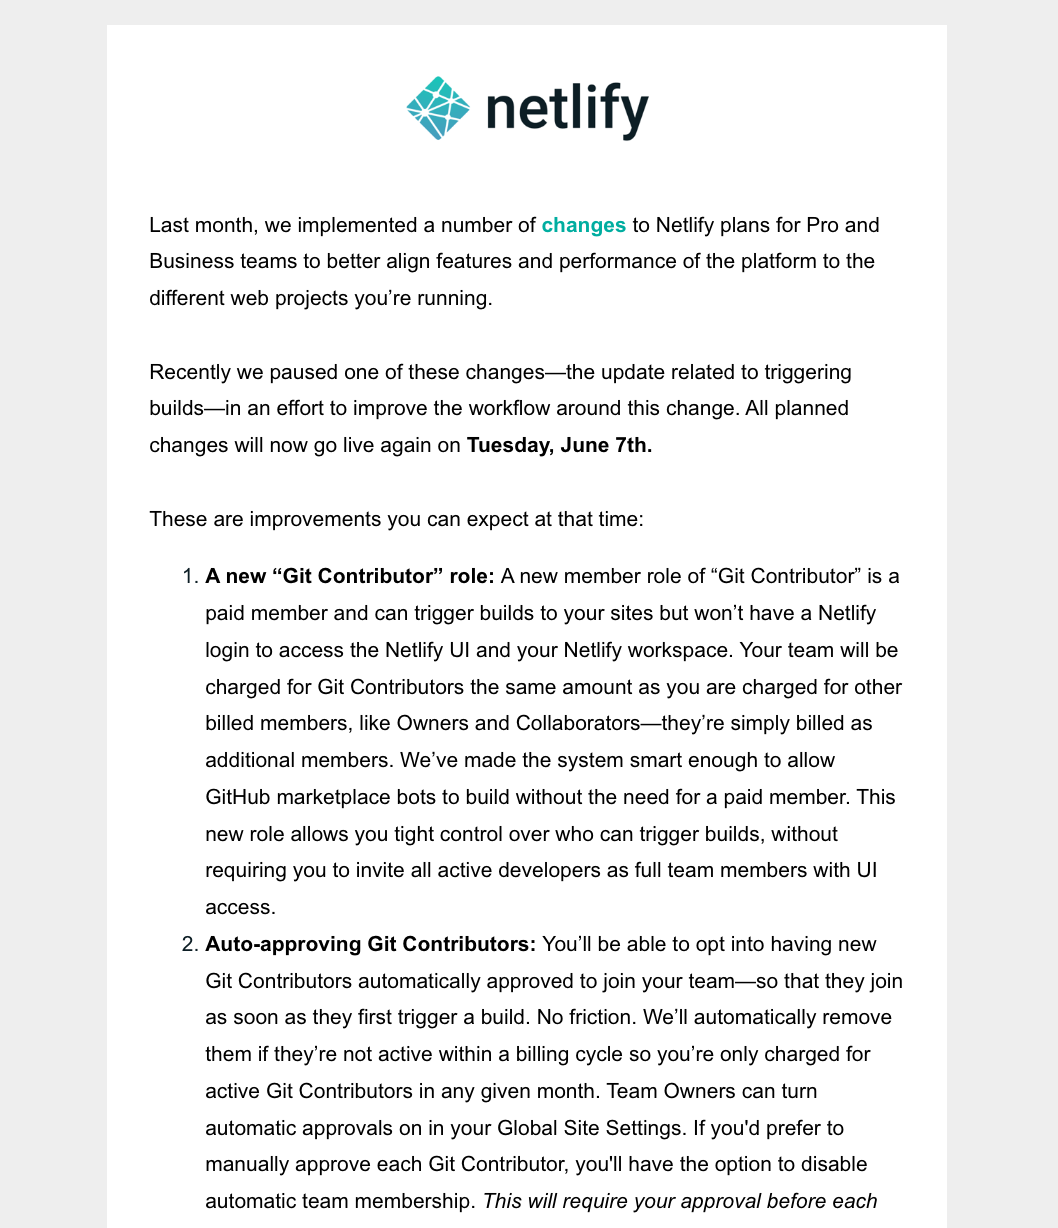 Email Marketing for Devtools: Screenshot of Netlify's pricing update email